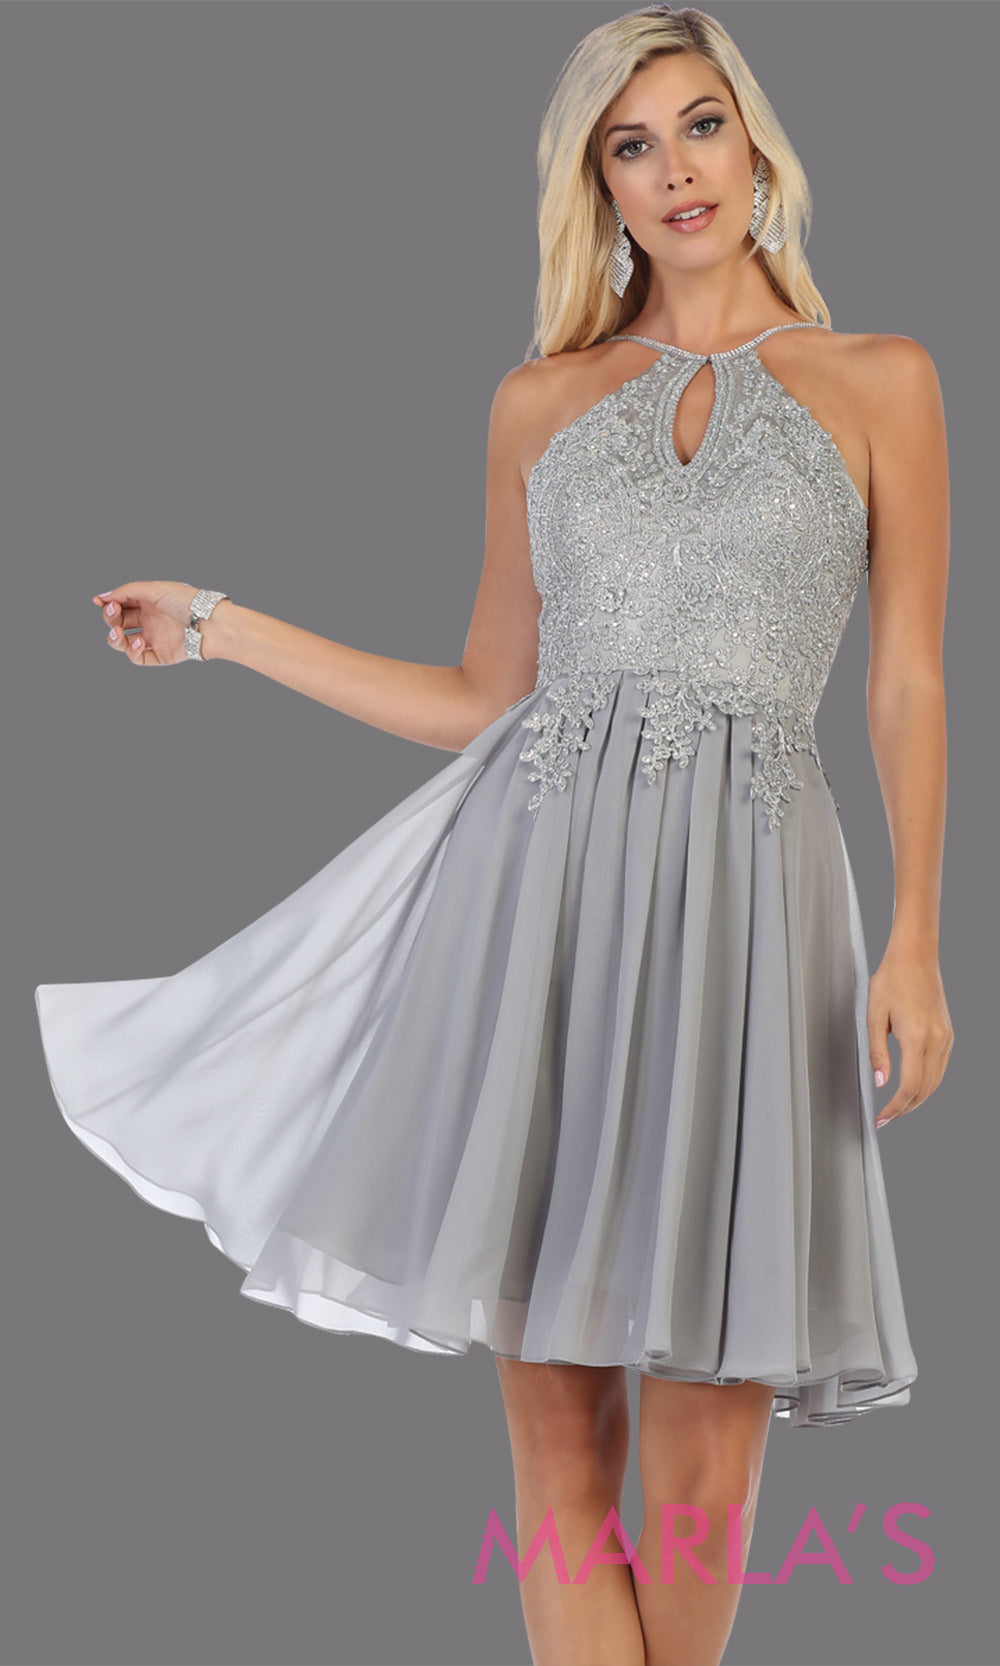 Short high neck silver grey grade 8 graduation dress with flowy skirt from mayqueen. This light gray low back flowy dress is perfect for plus size grad, homecoming, Bat Mitzvah, quinceanera damas, middle school graduation, junior bridesmaidsgrade 8 grad dresses, graduation dresses